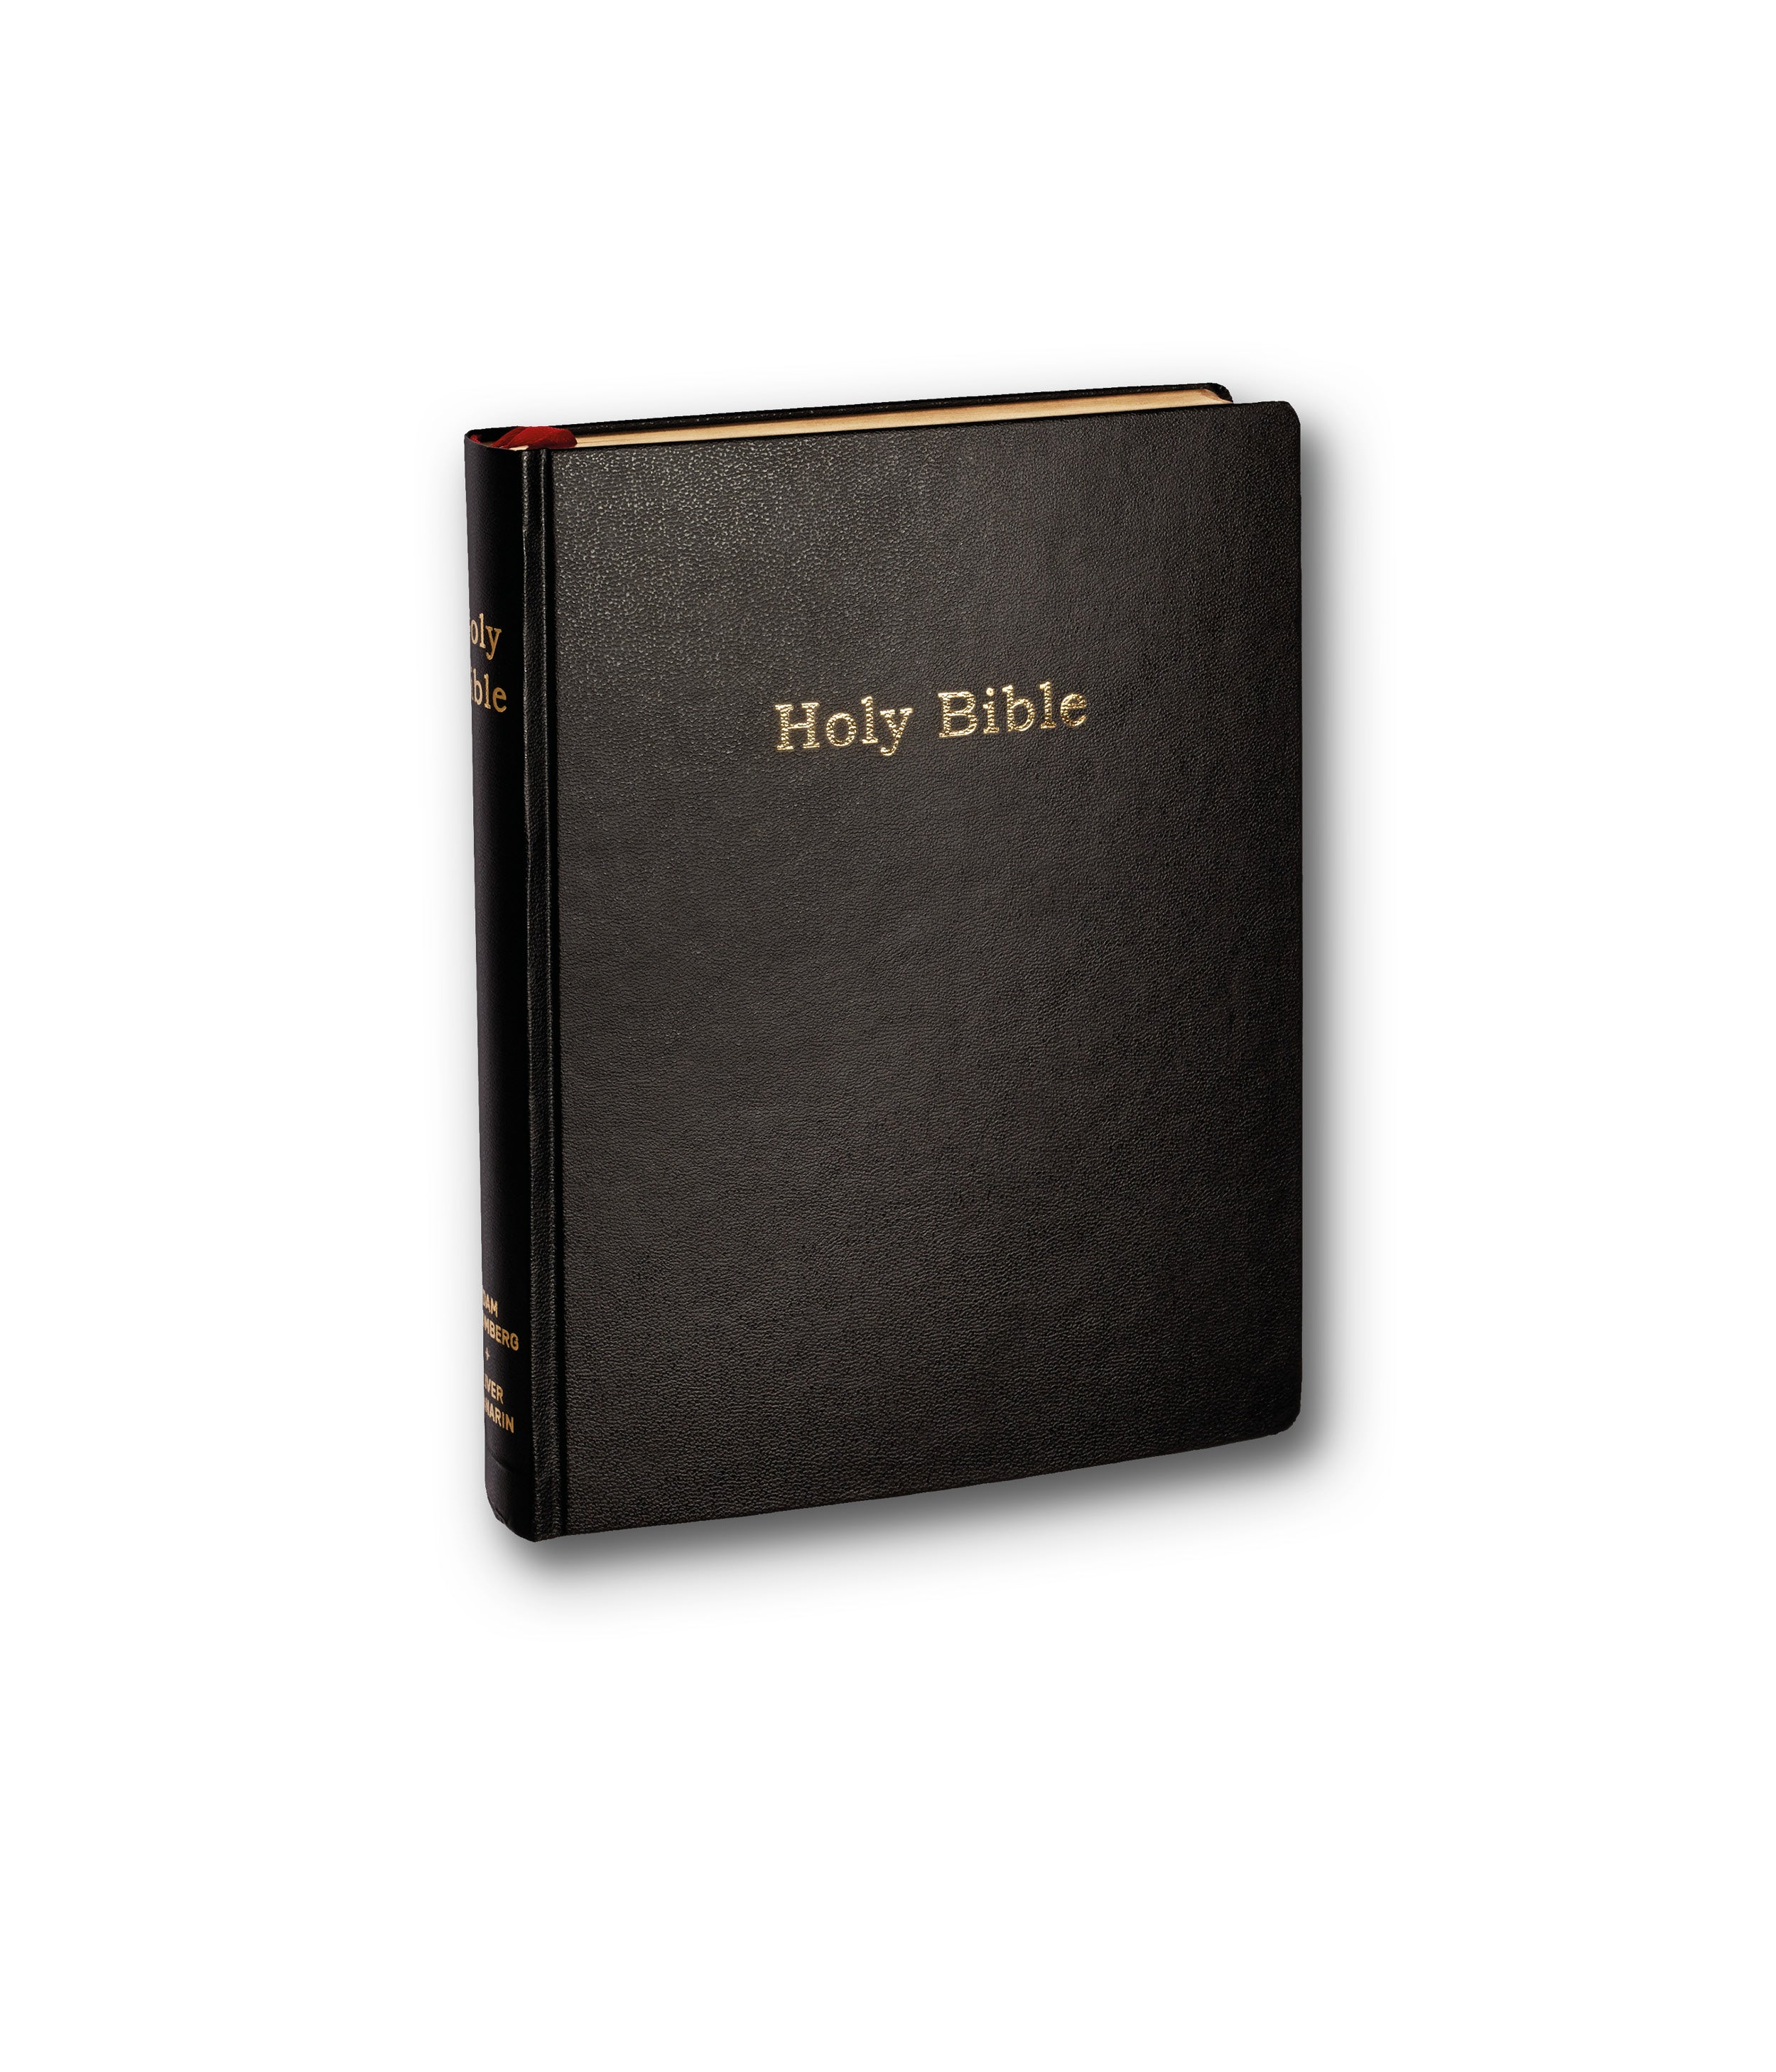 Holy Bible (Second printing)